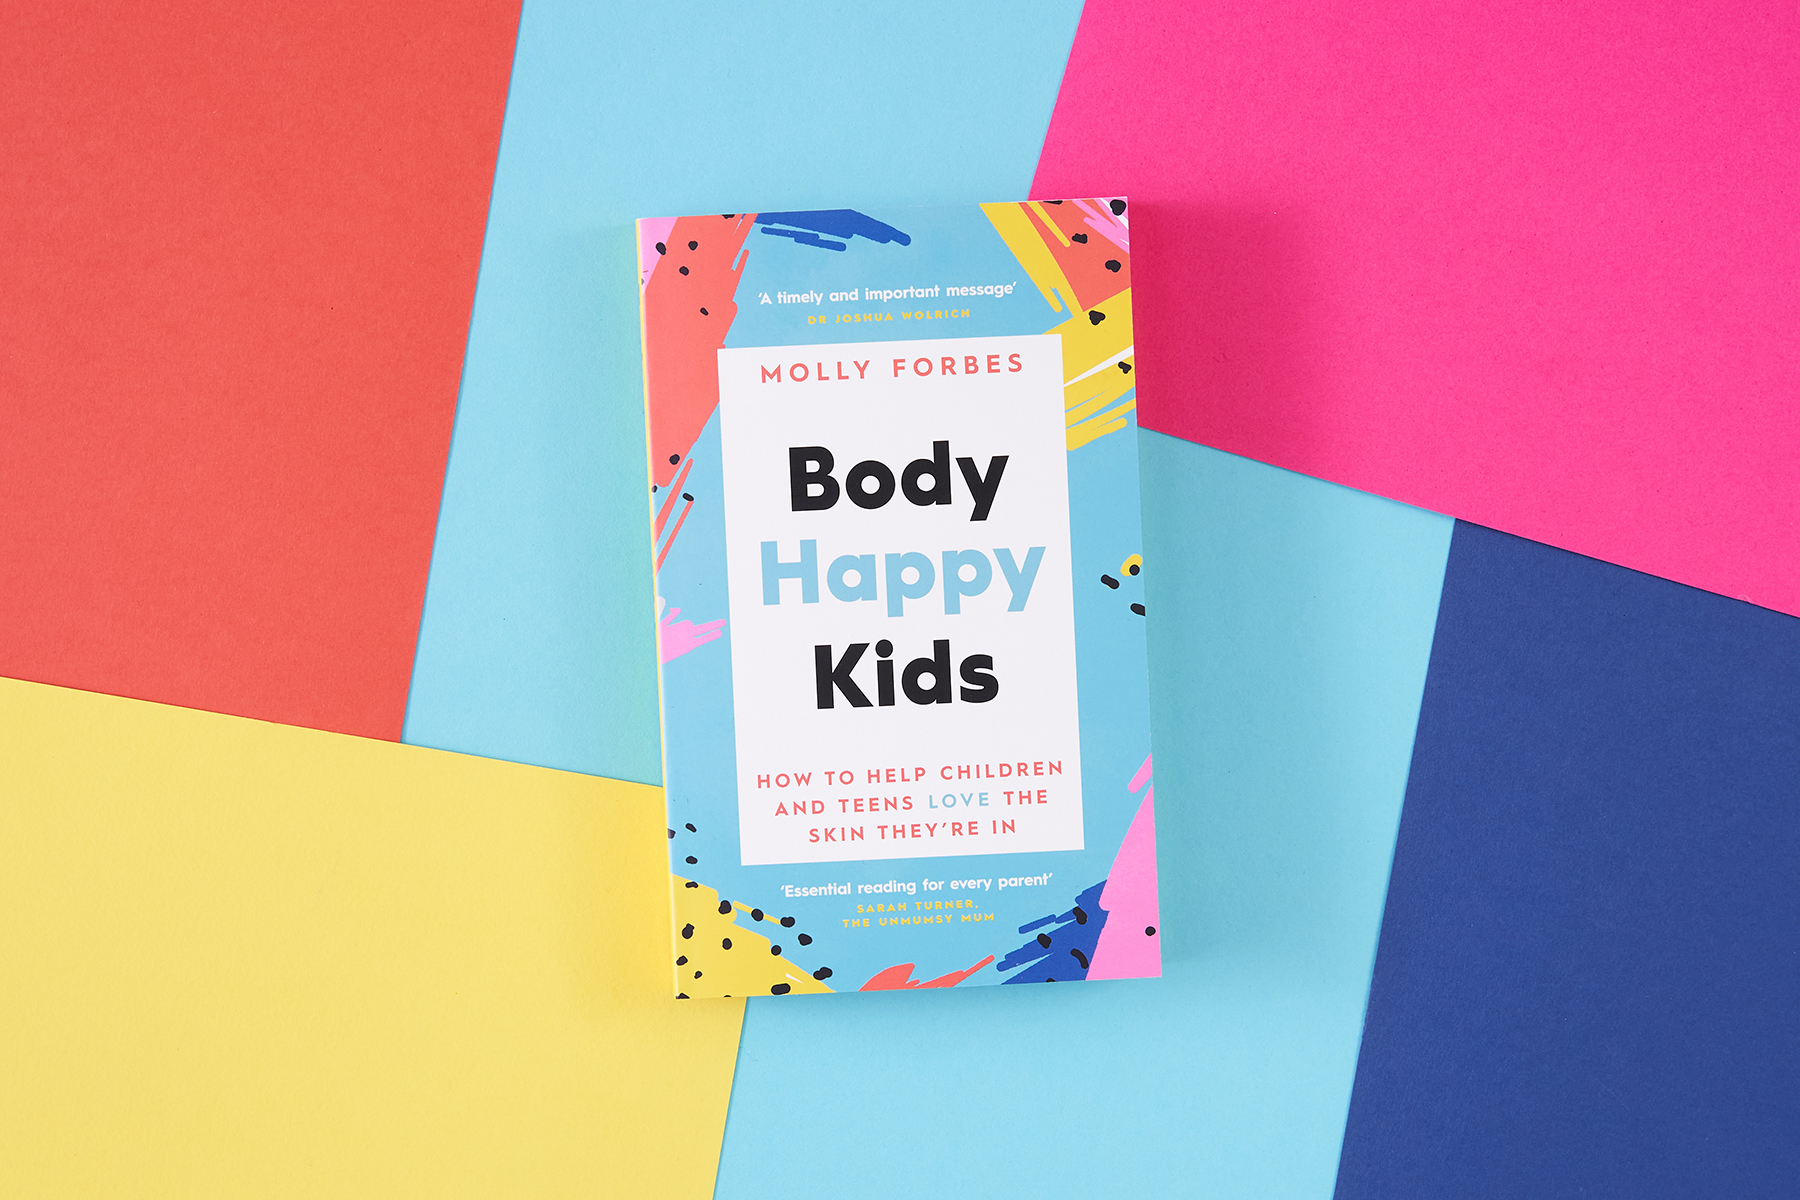 A photo of Molly Forbes' book Body Happy Kids on a multicoloured (coral, hot pink, dark blue, light blue and yellow) paper background